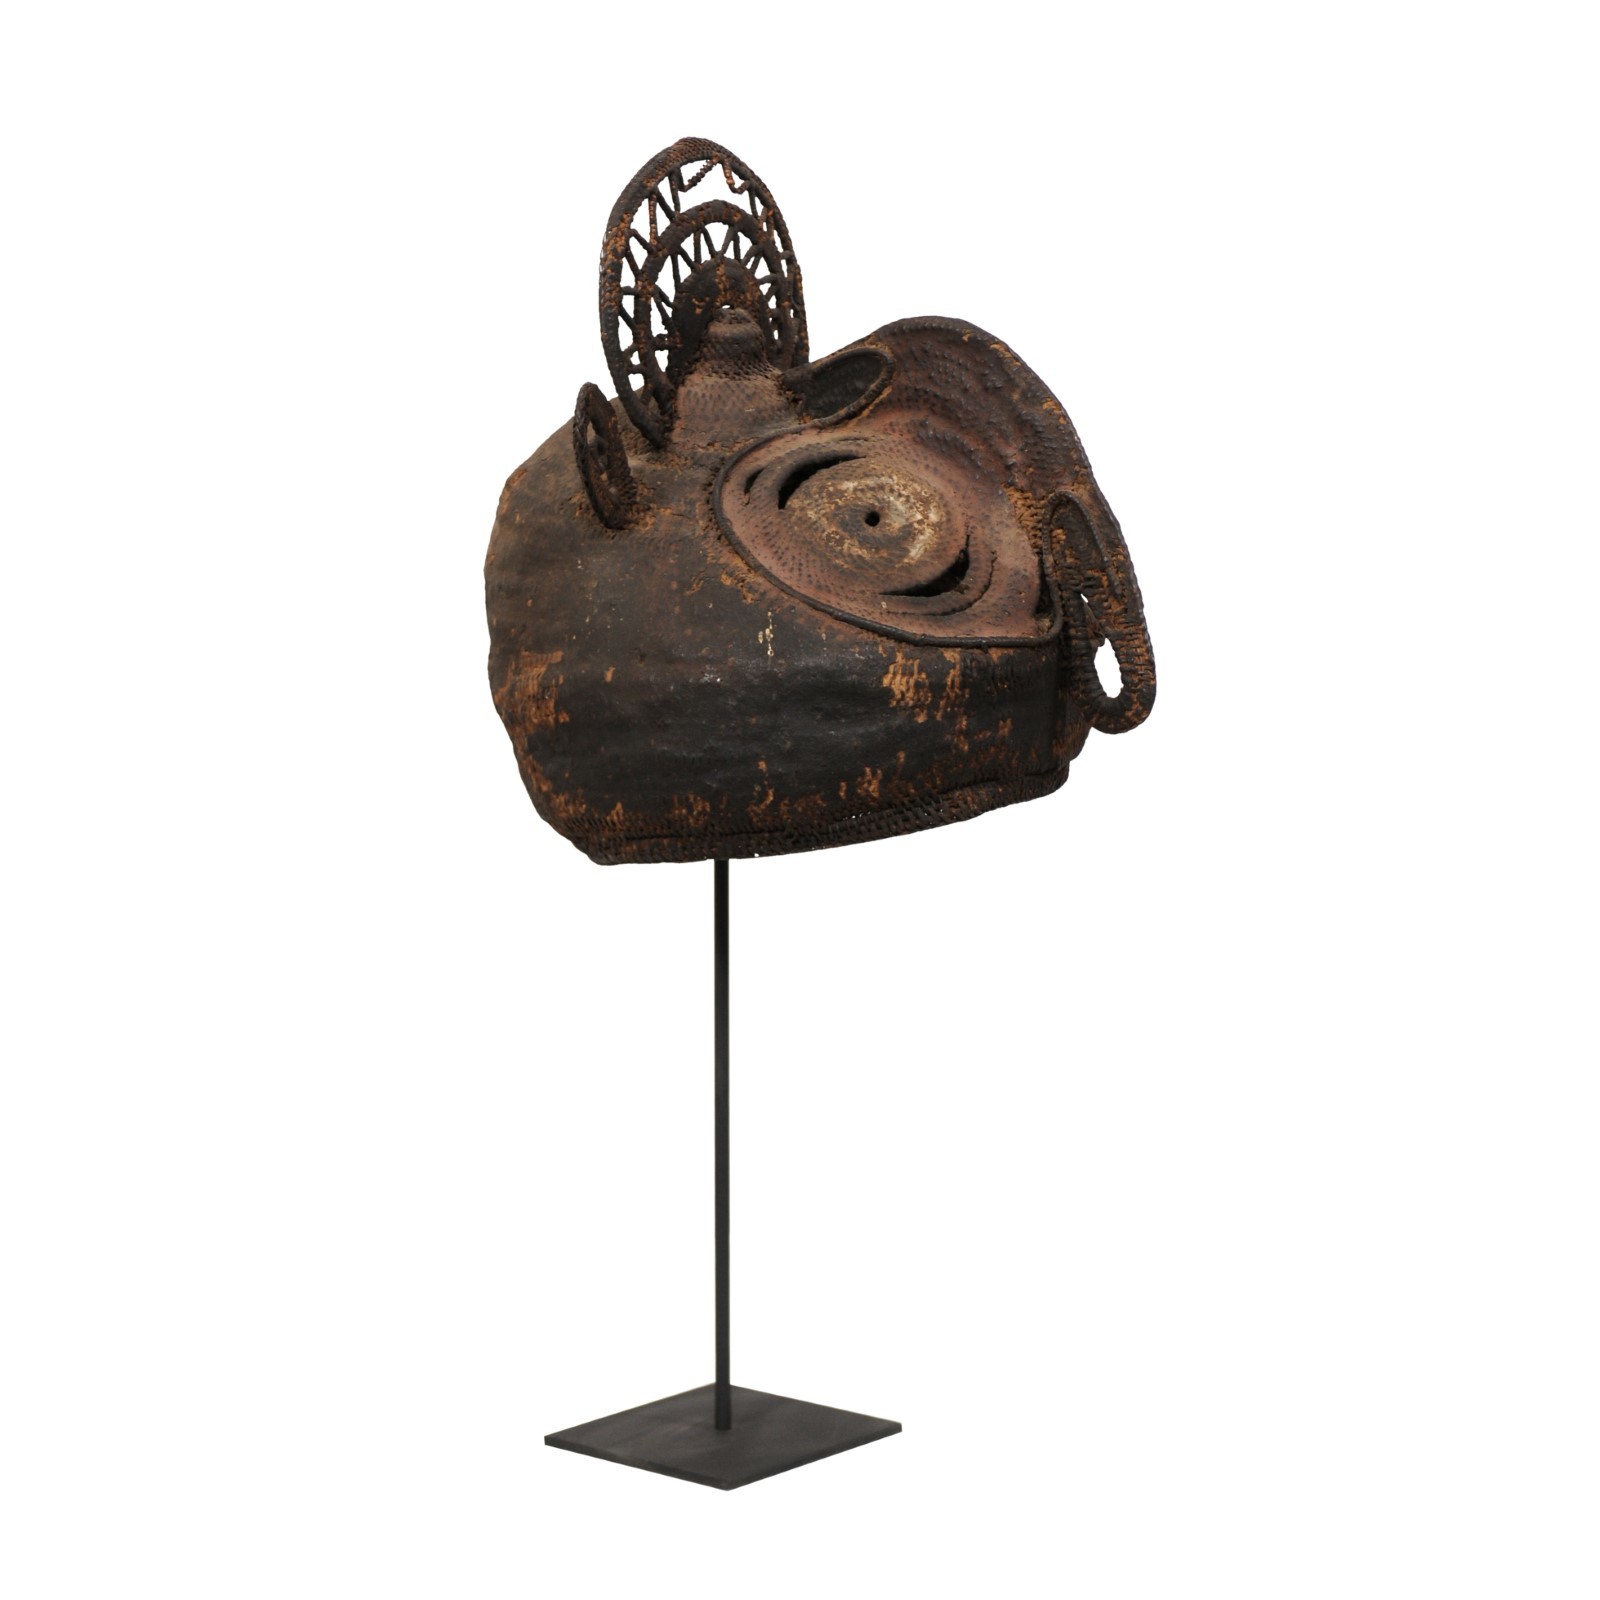 An Abelam "Yam Festival" Mask on Stand